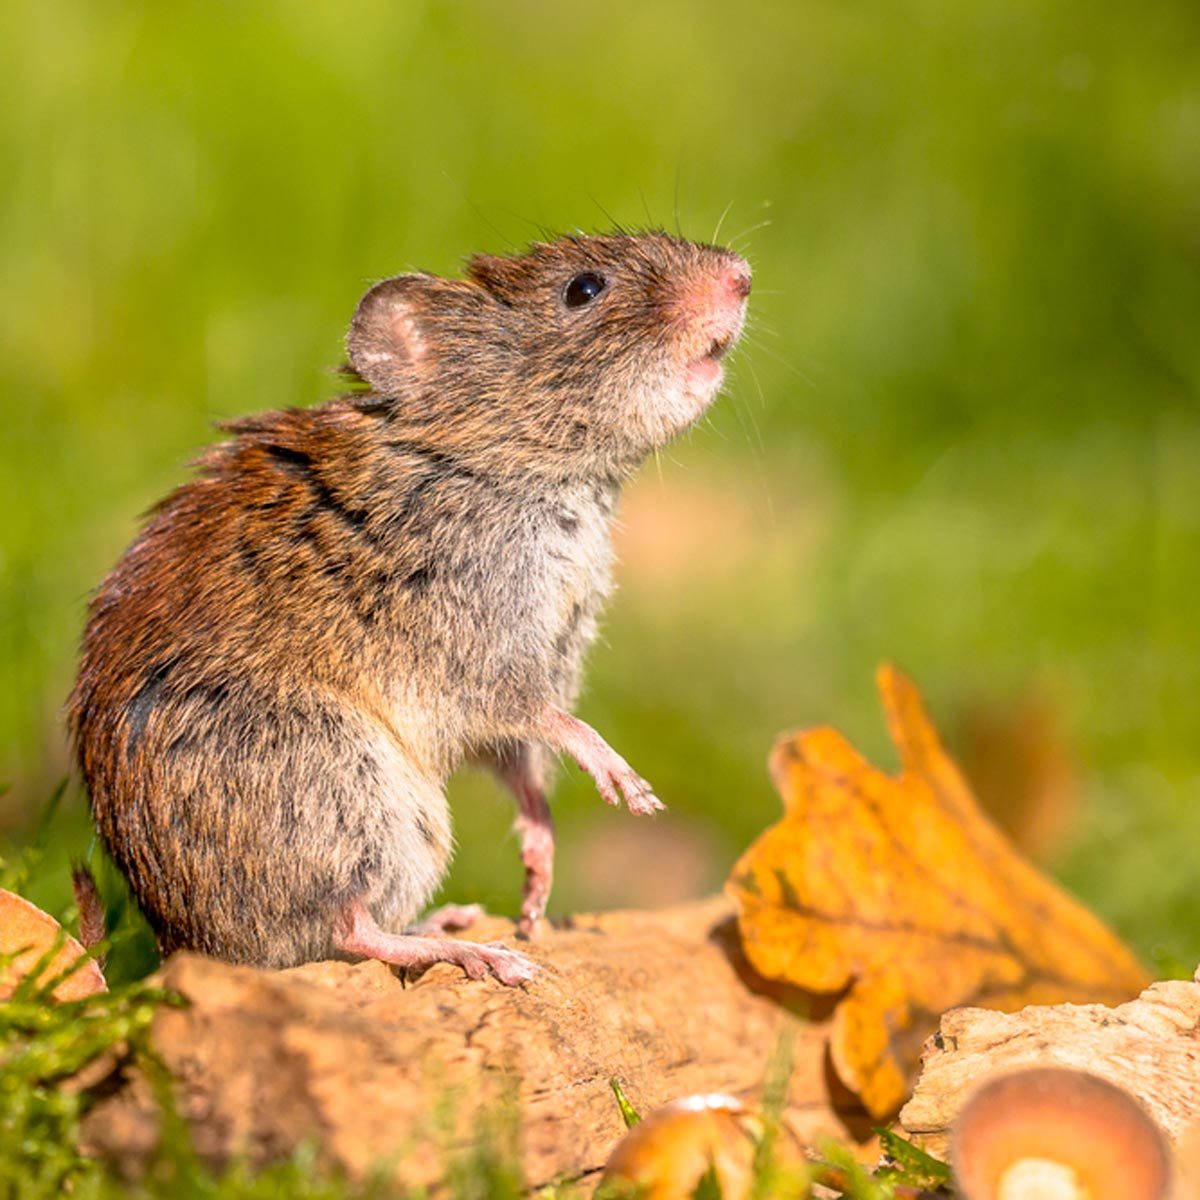 Kill to rats remedies natural How to